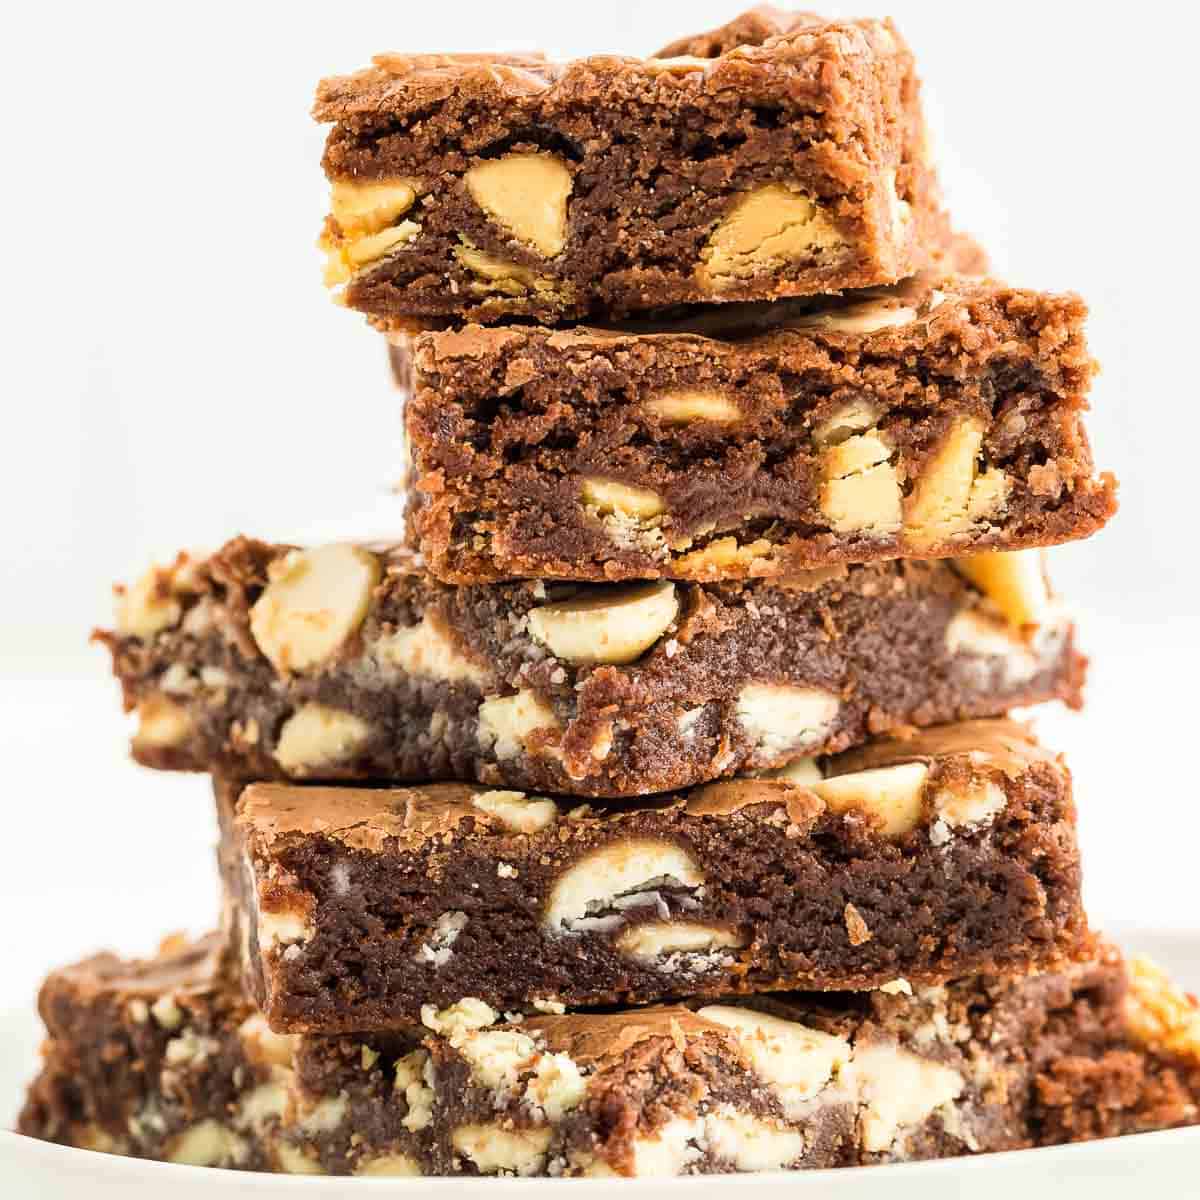 A stack of freshly baked White Chocolate Chip Brownies on a white plate